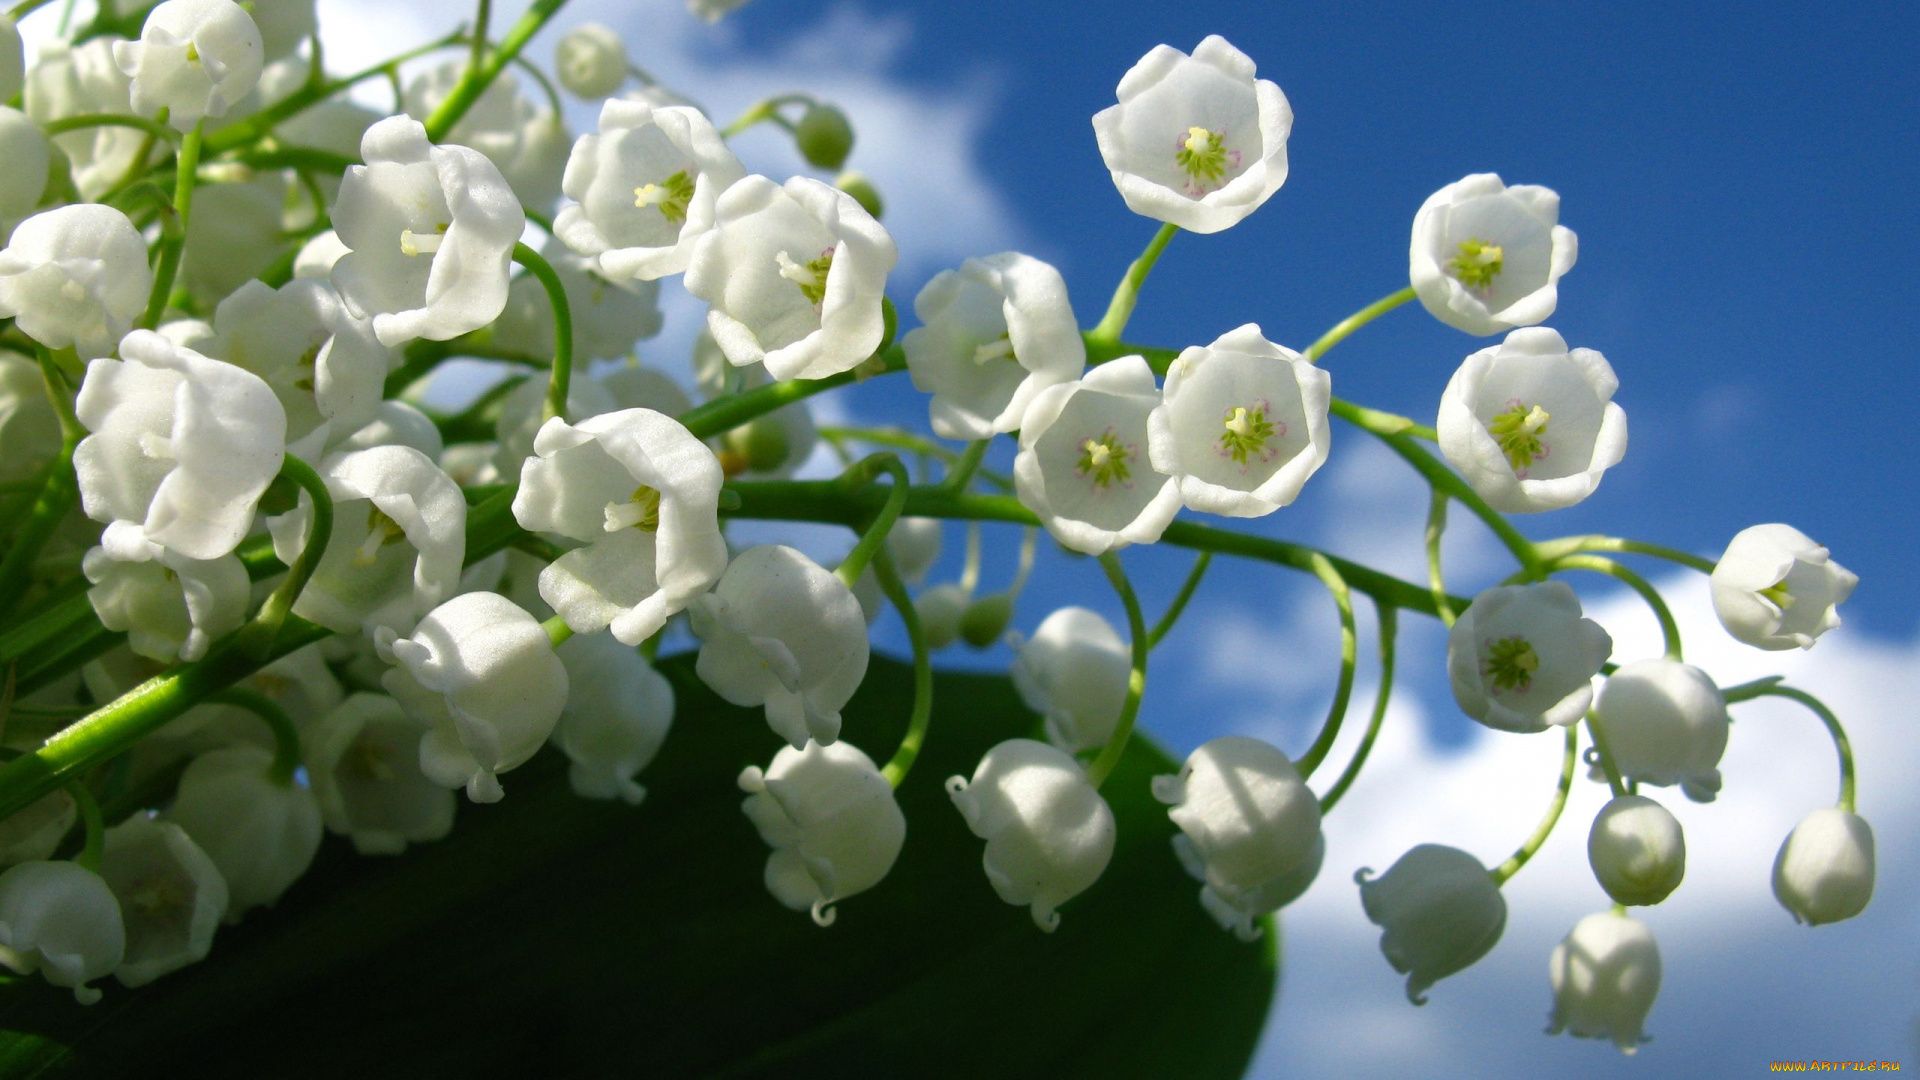 Lily Of The Valley wallpaper photo hd